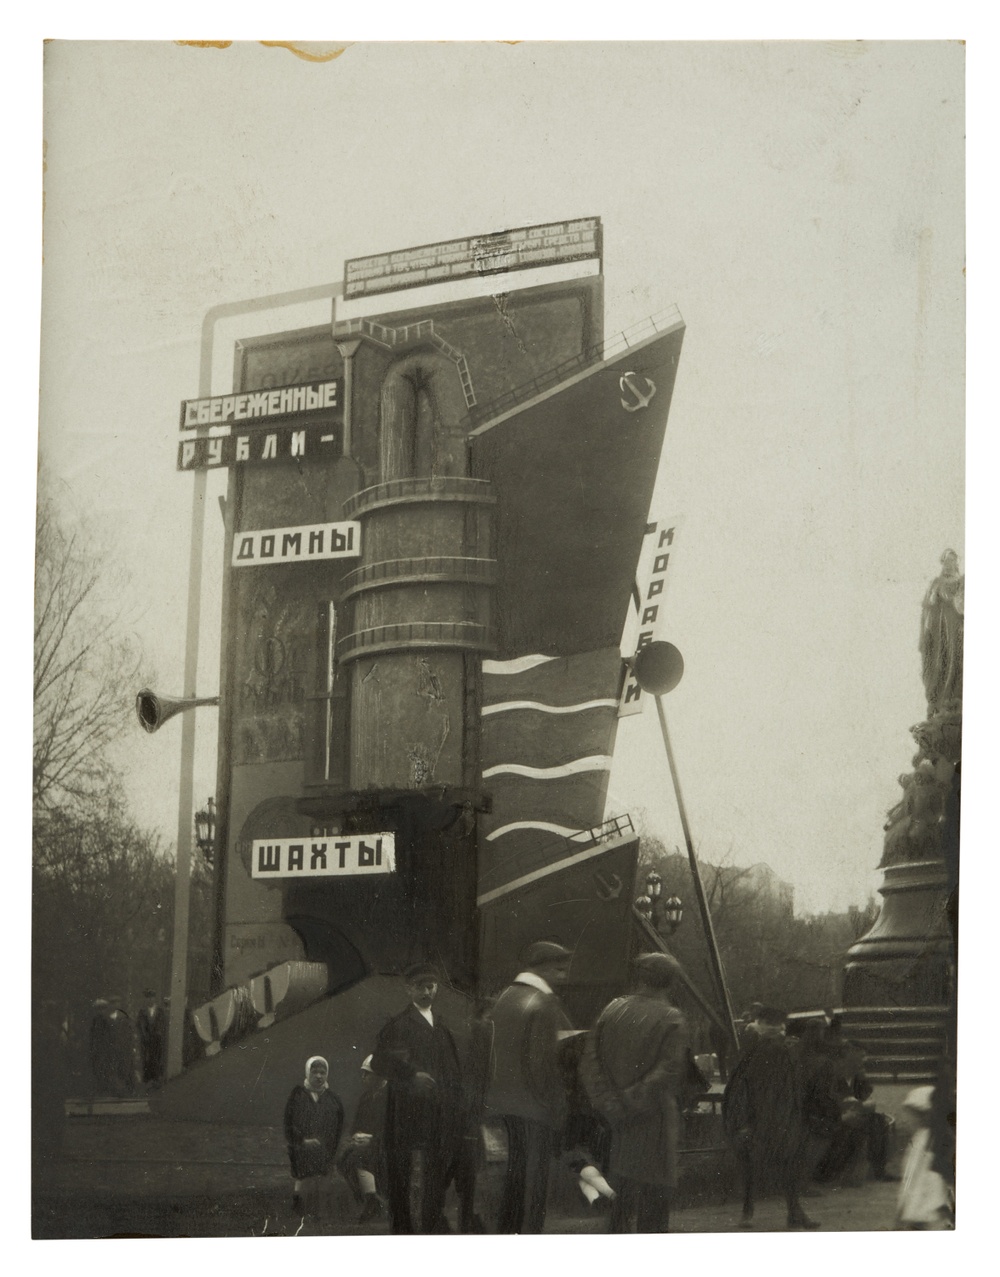 Black and white photograph of an abstract building structure with Russian signage, possibly in a park with people walking around it.